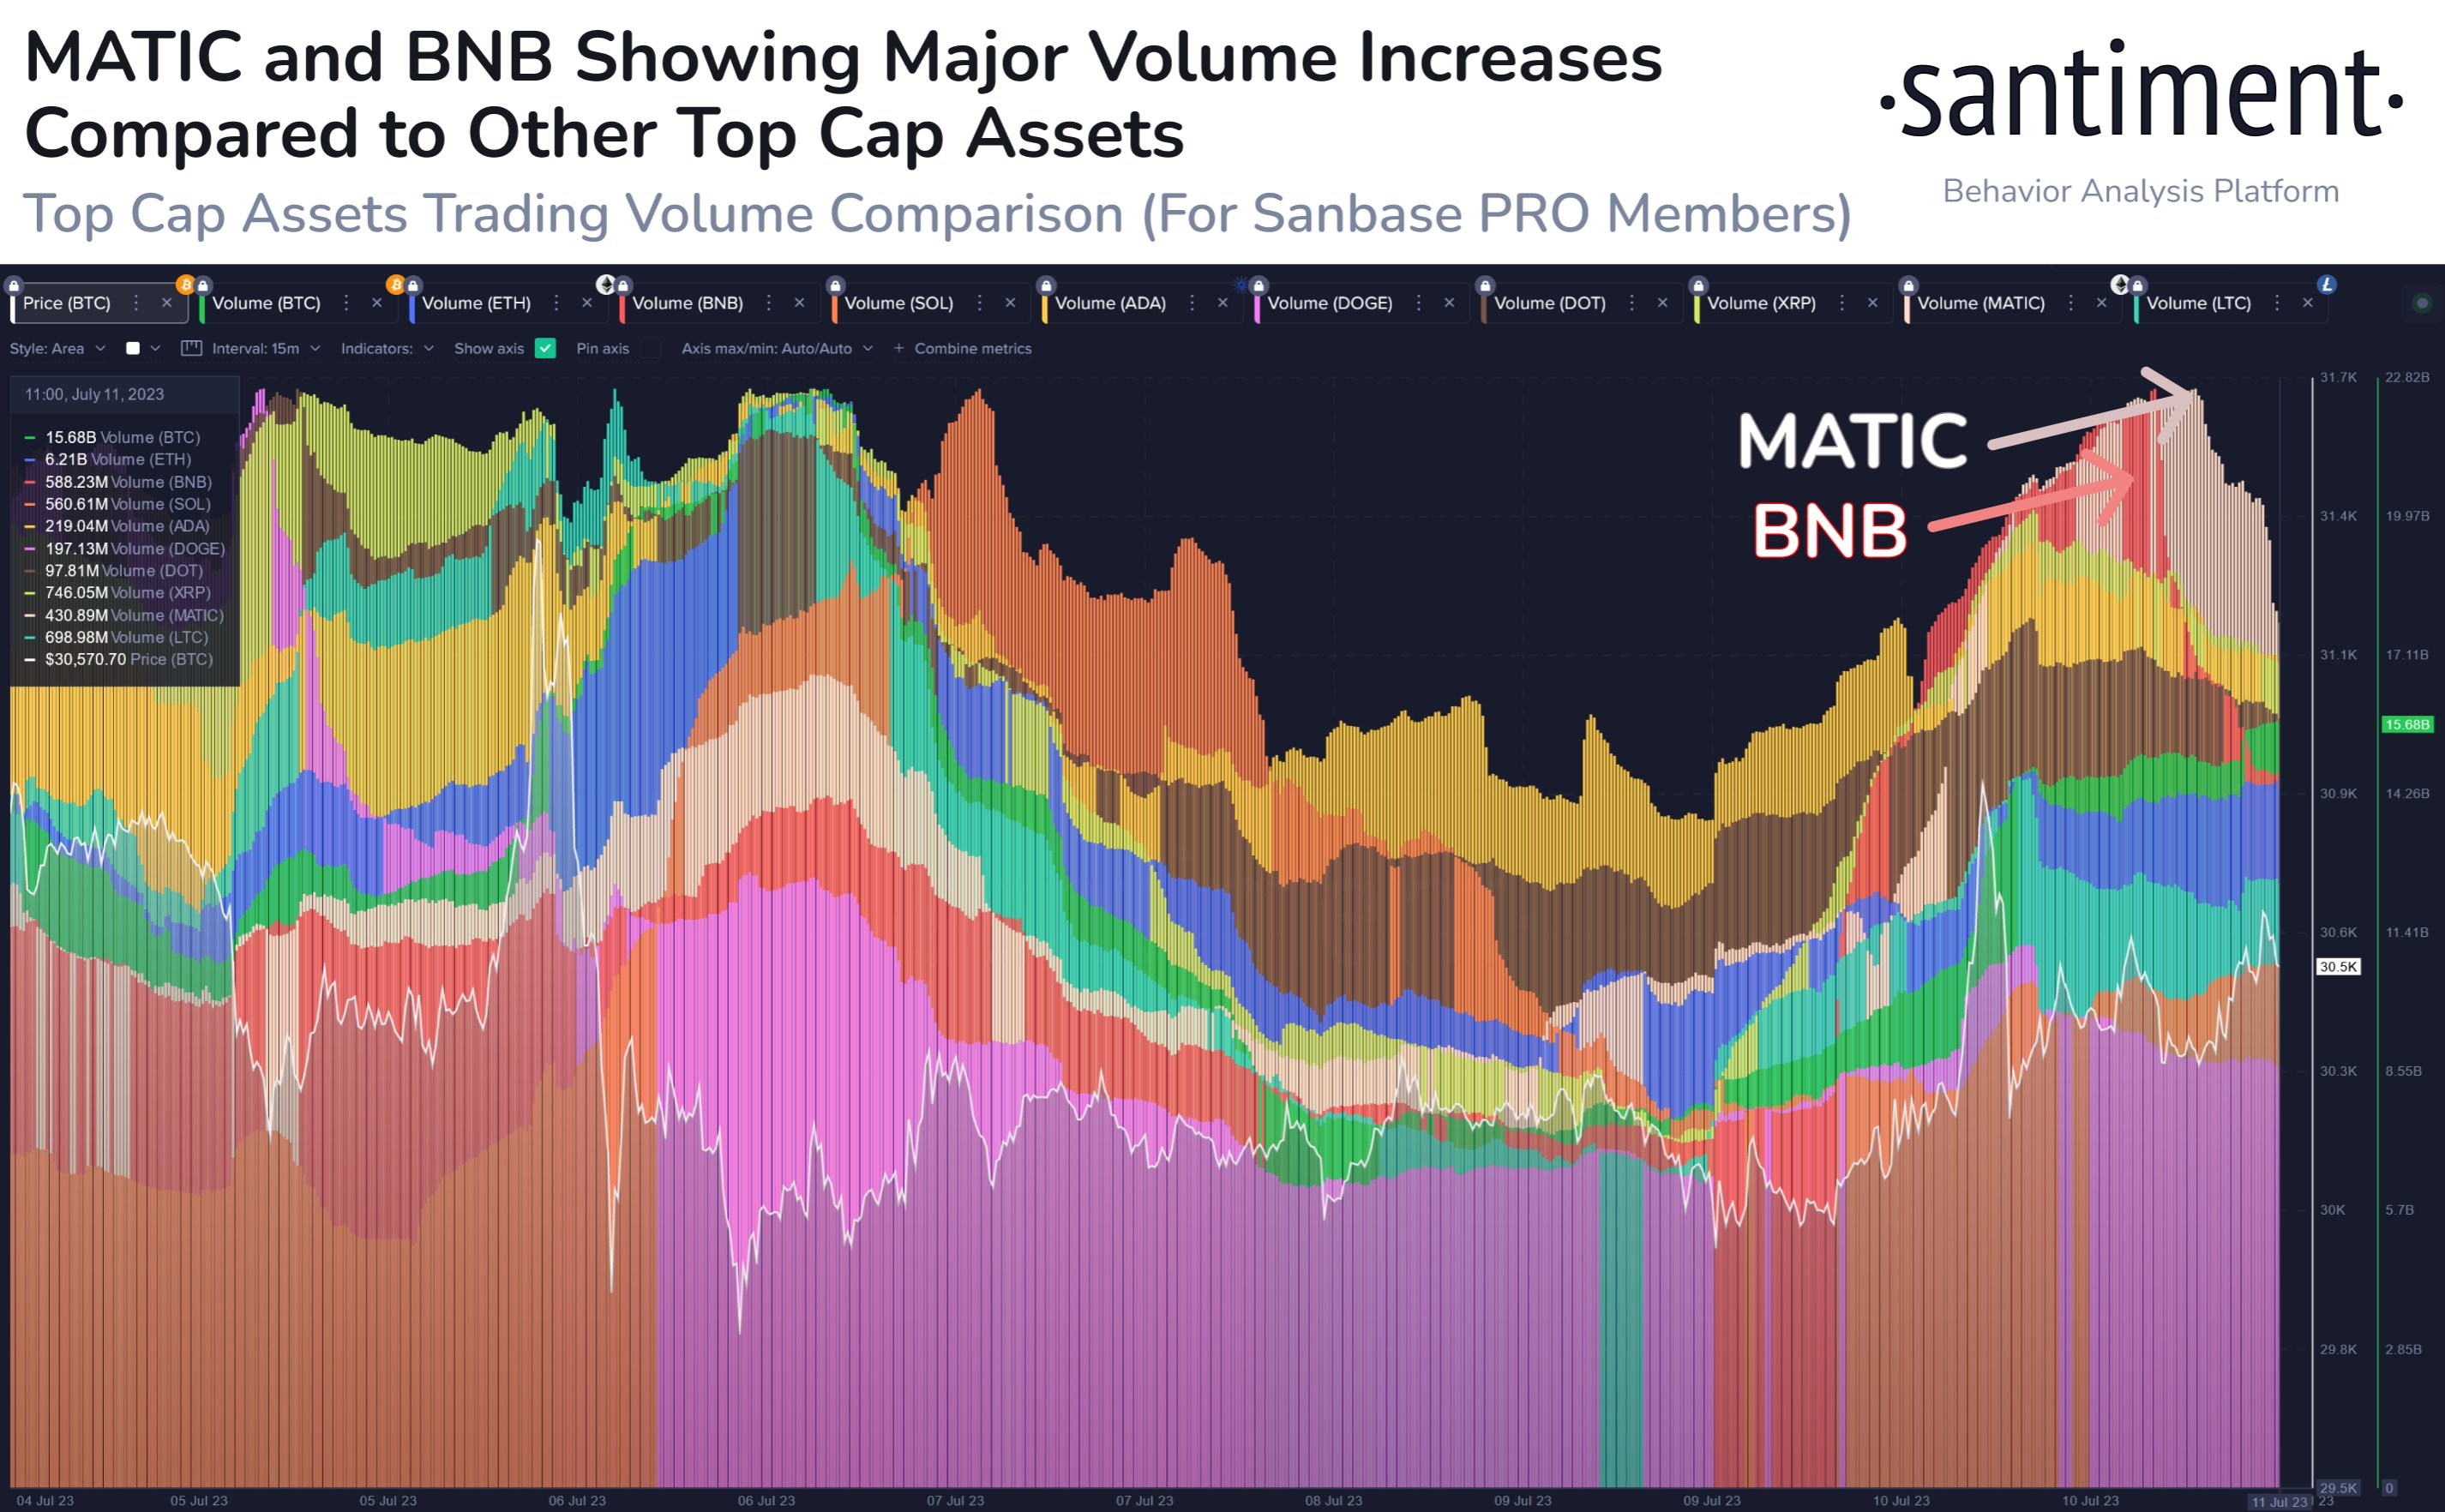 MATIC and BNB show major volume increase